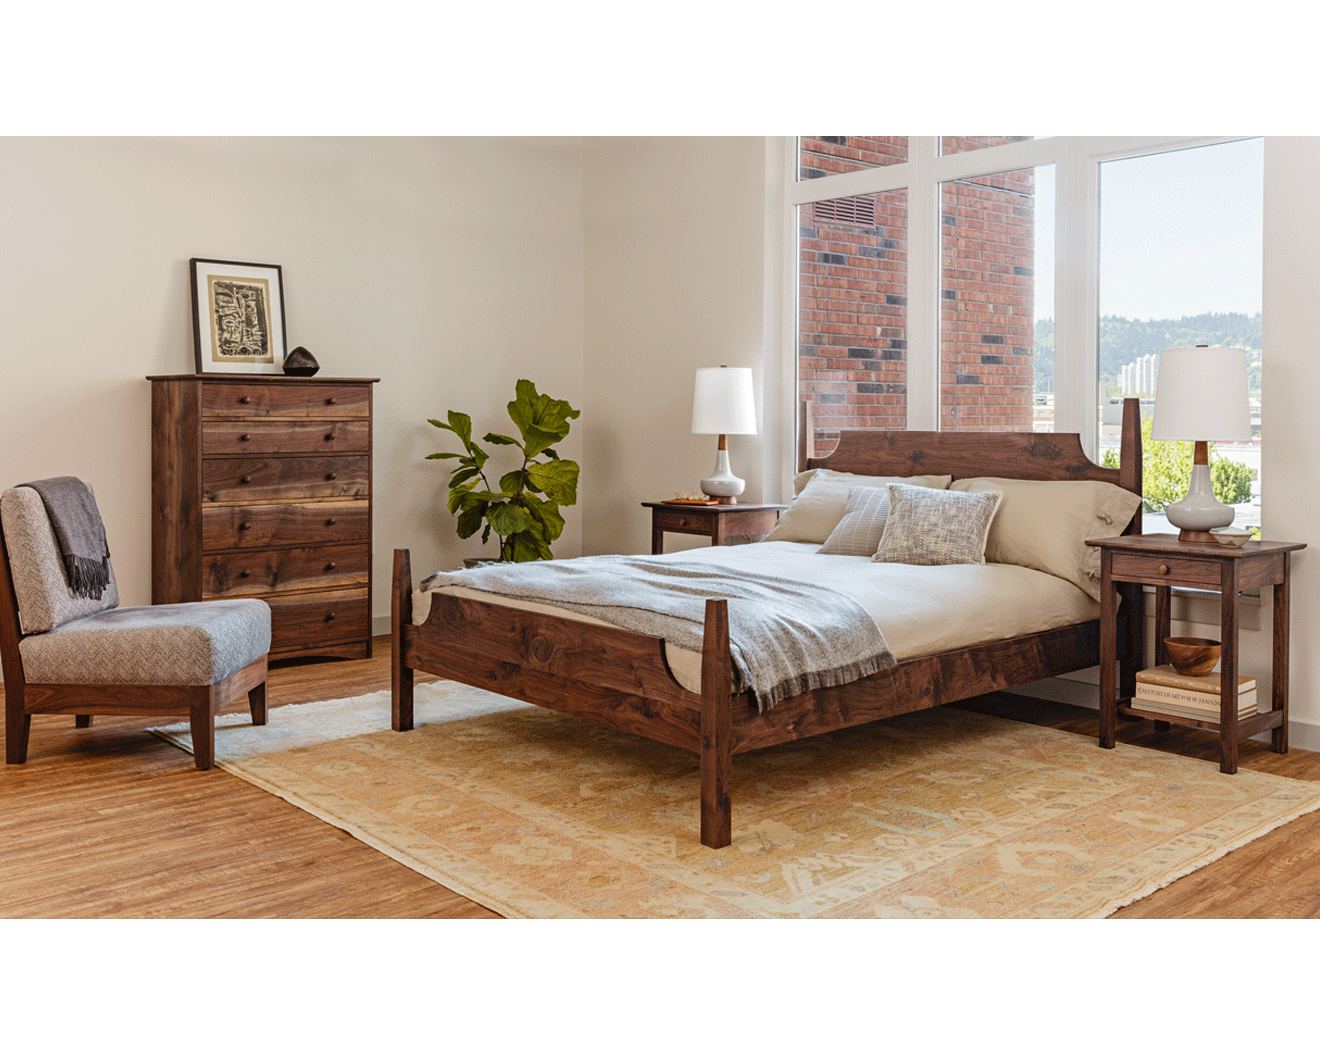 Joinery Tall 6-Drawer dresser in Western Walnut without thru joints on top drawers. Featured with Arts and Crafts Bed, Shaker Nighstand, and Slipper Chair